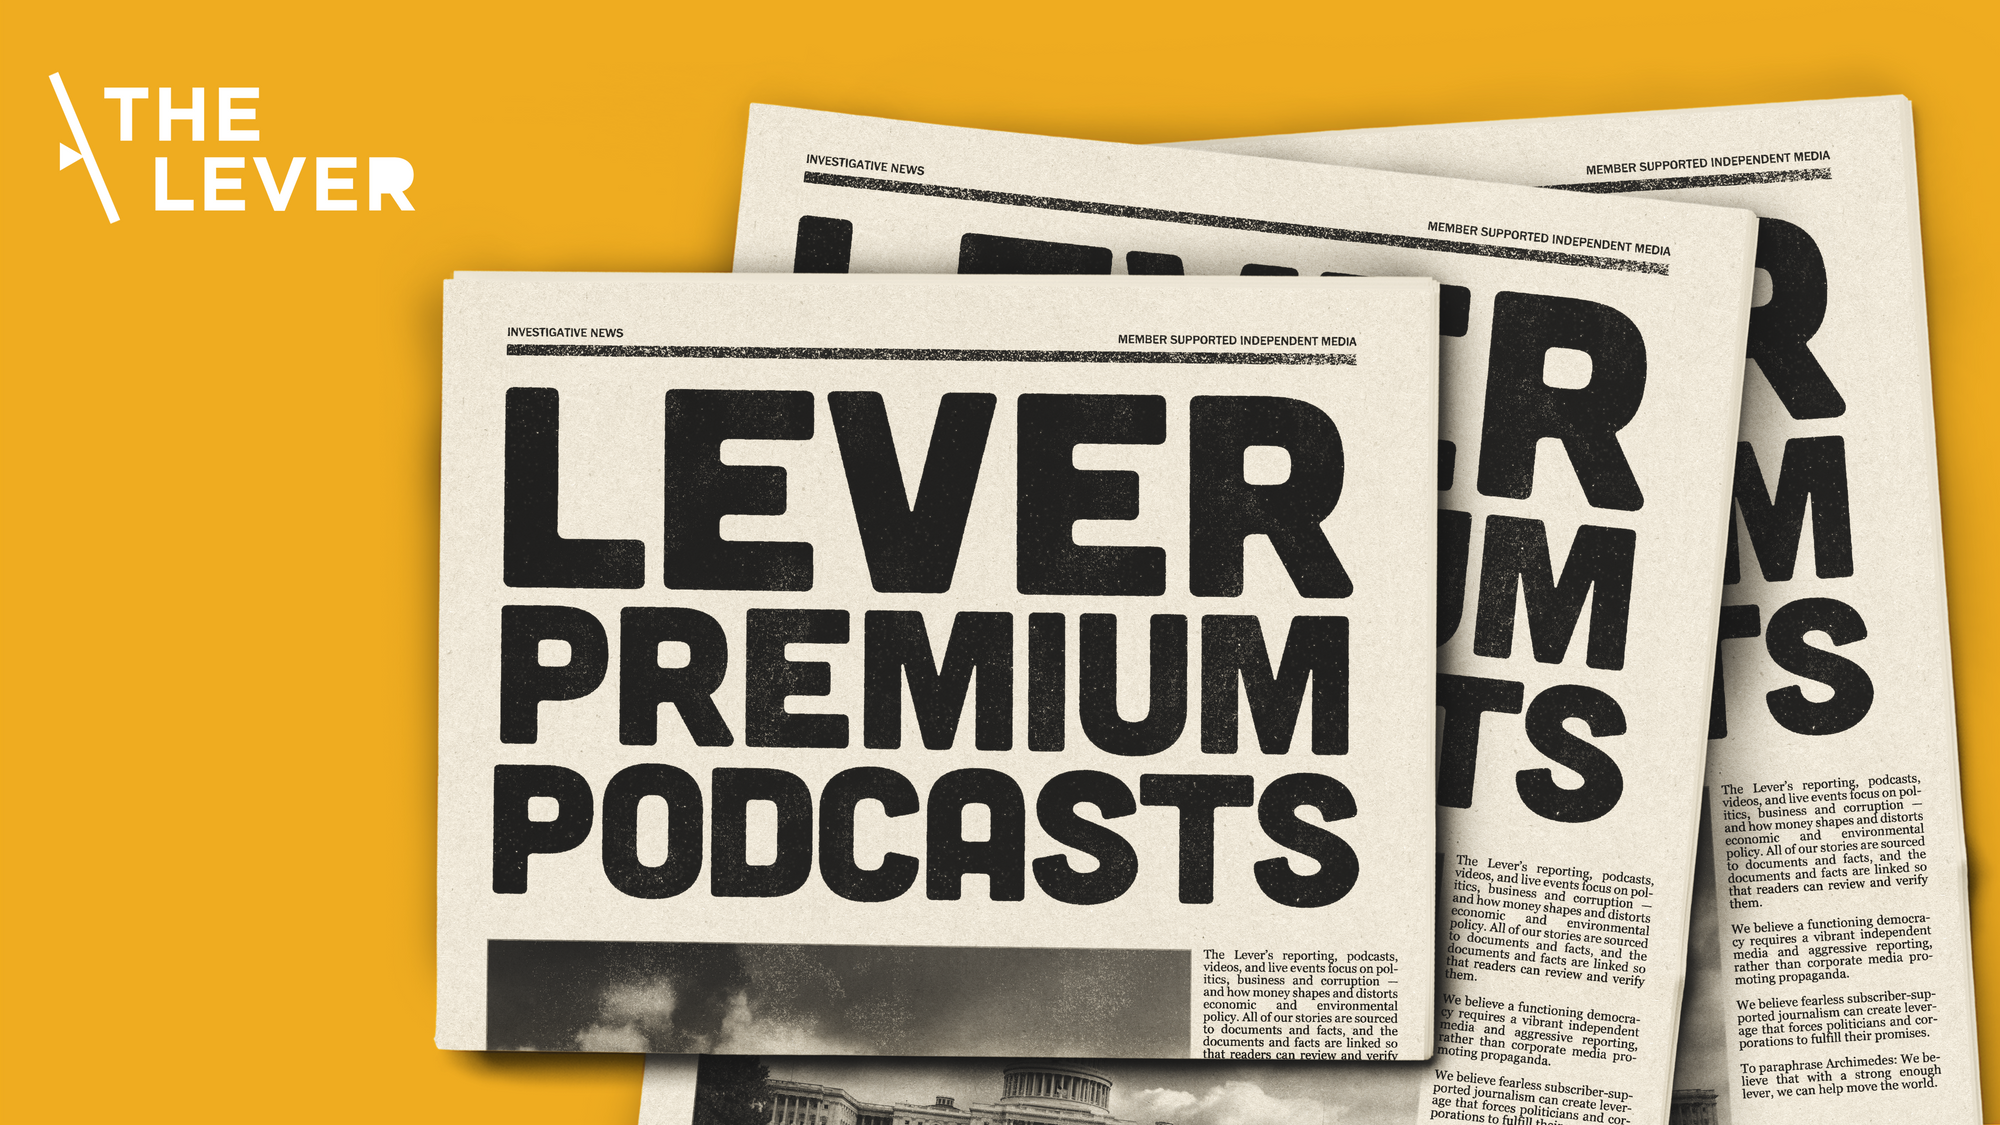 Premium Podcast Content from The Lever